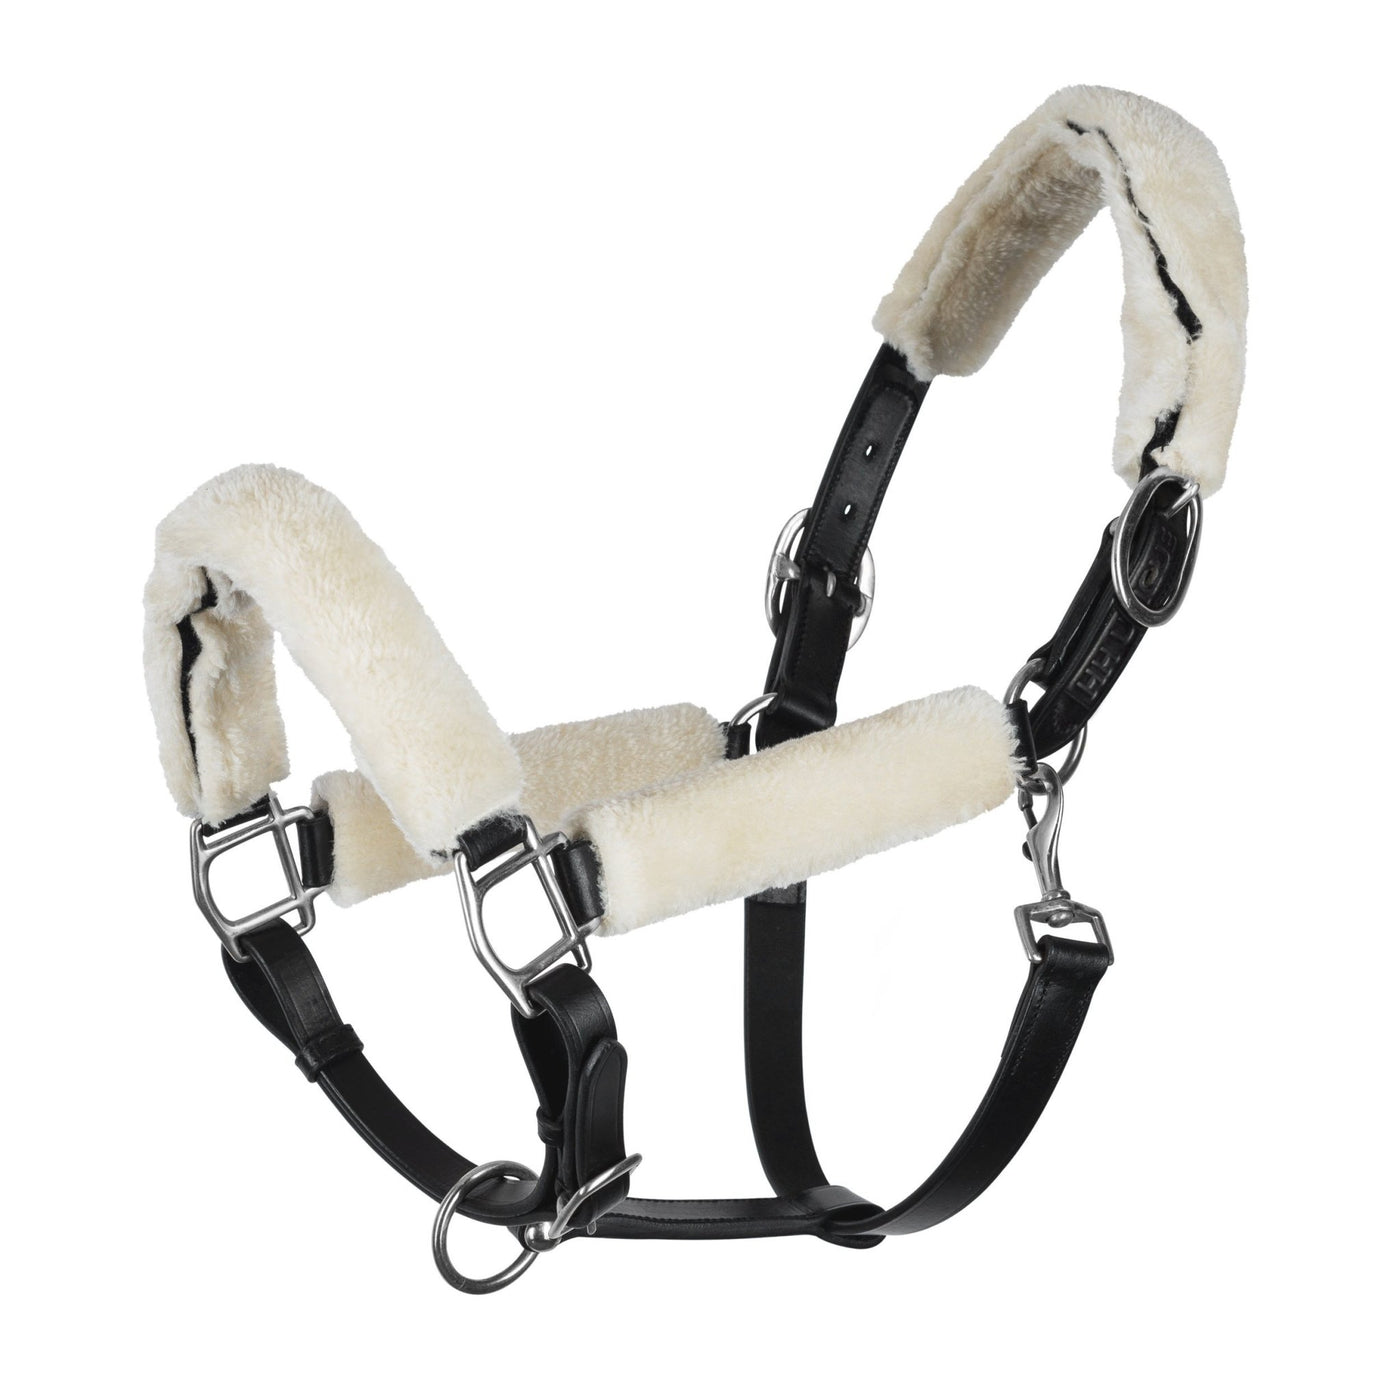 Luxury Real Leather Halter complete with detachable cream wool artificial sheepskin protection tabs. Helping to prevent chafing and irritation during travel with the sheepskin fibres also wicking moisture and providing a cushioning for ultimate comfort to your horse. Luxury soft leather Head Collar. Chic HH Unique Leather Stamped Branding; finished with quality stainless steel hardware. Ideal for sensitive ponies and horses